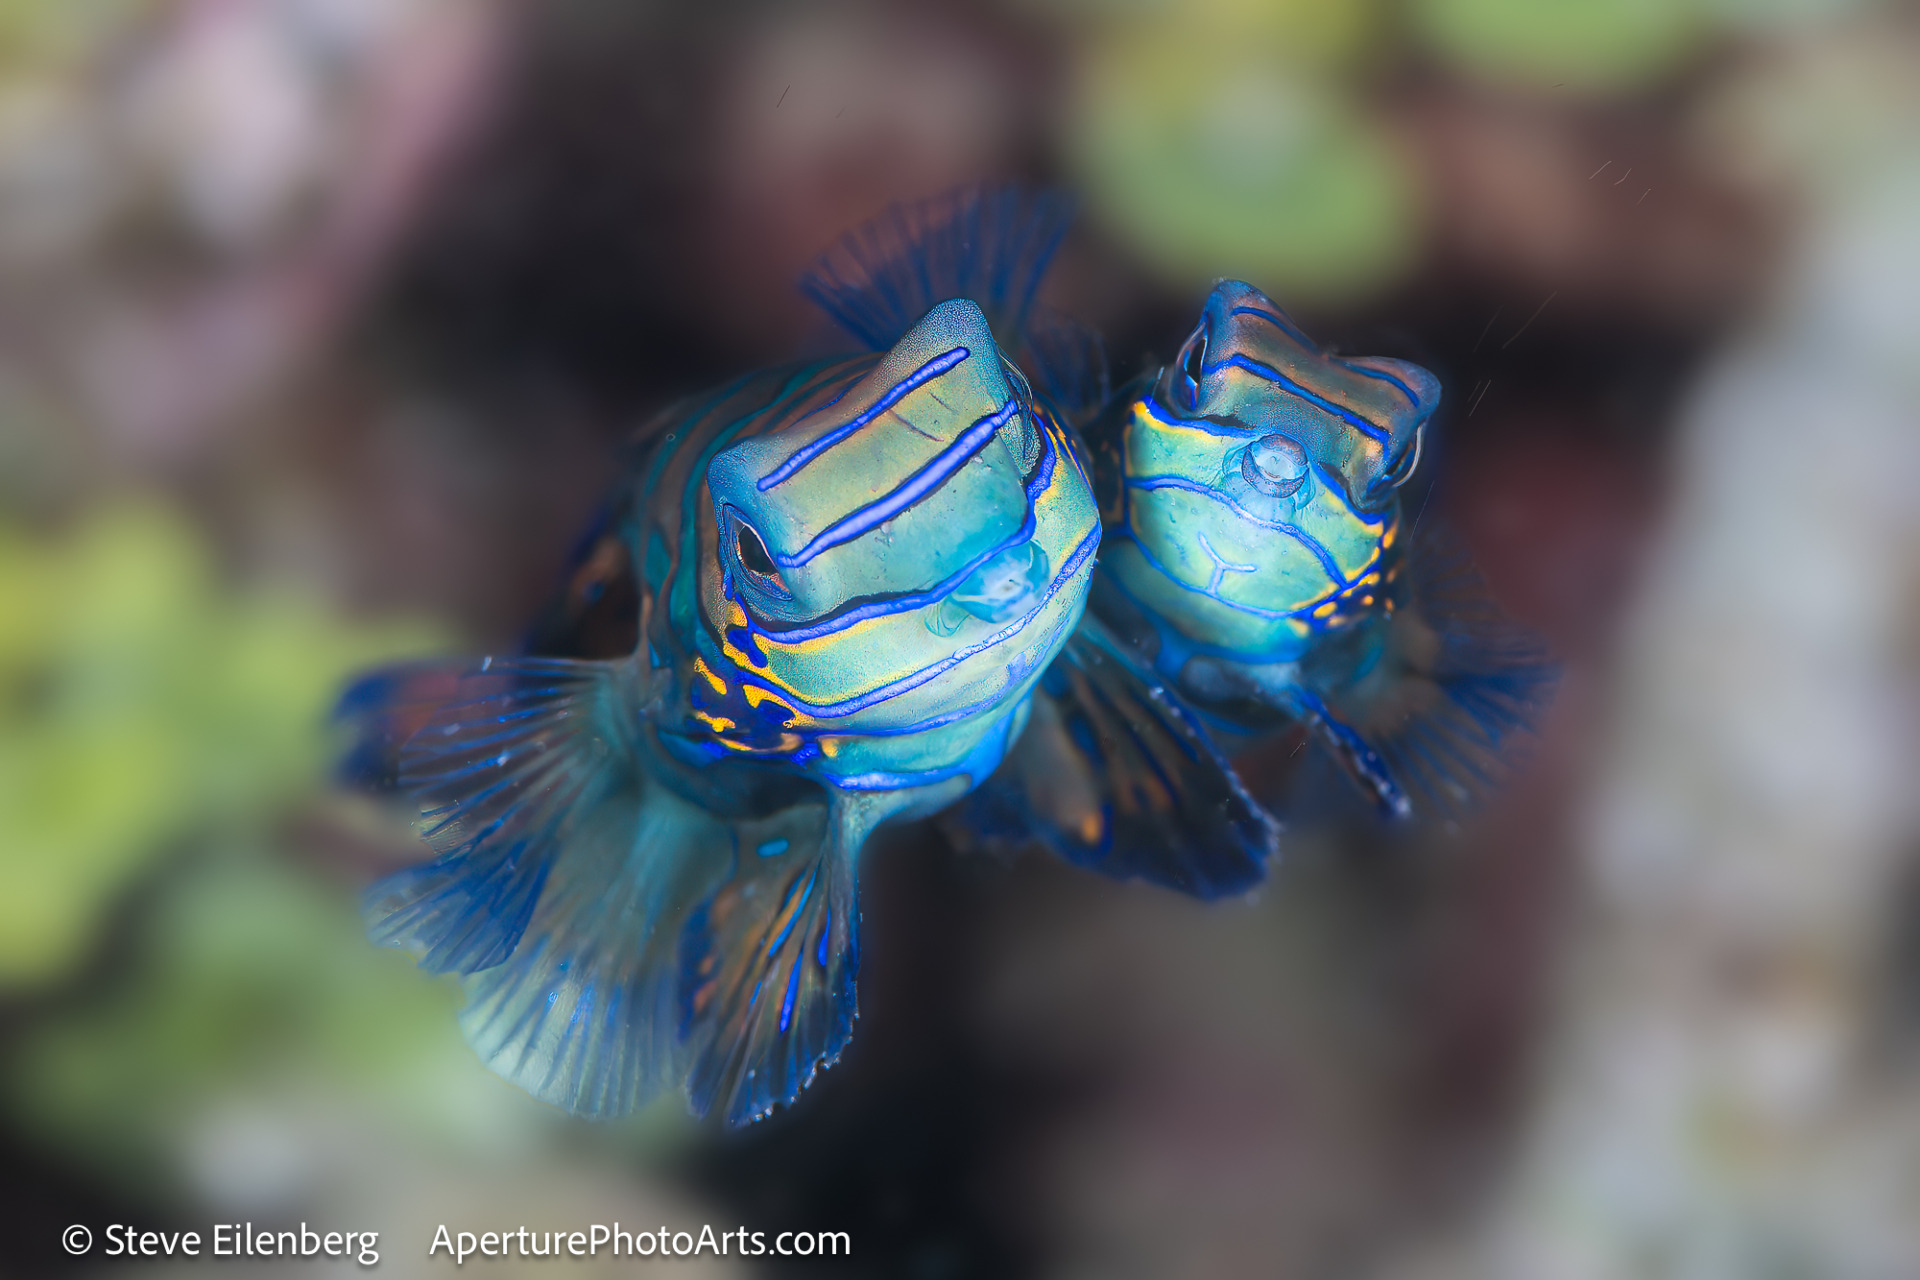 Mating mandarin fish with sperm in the water